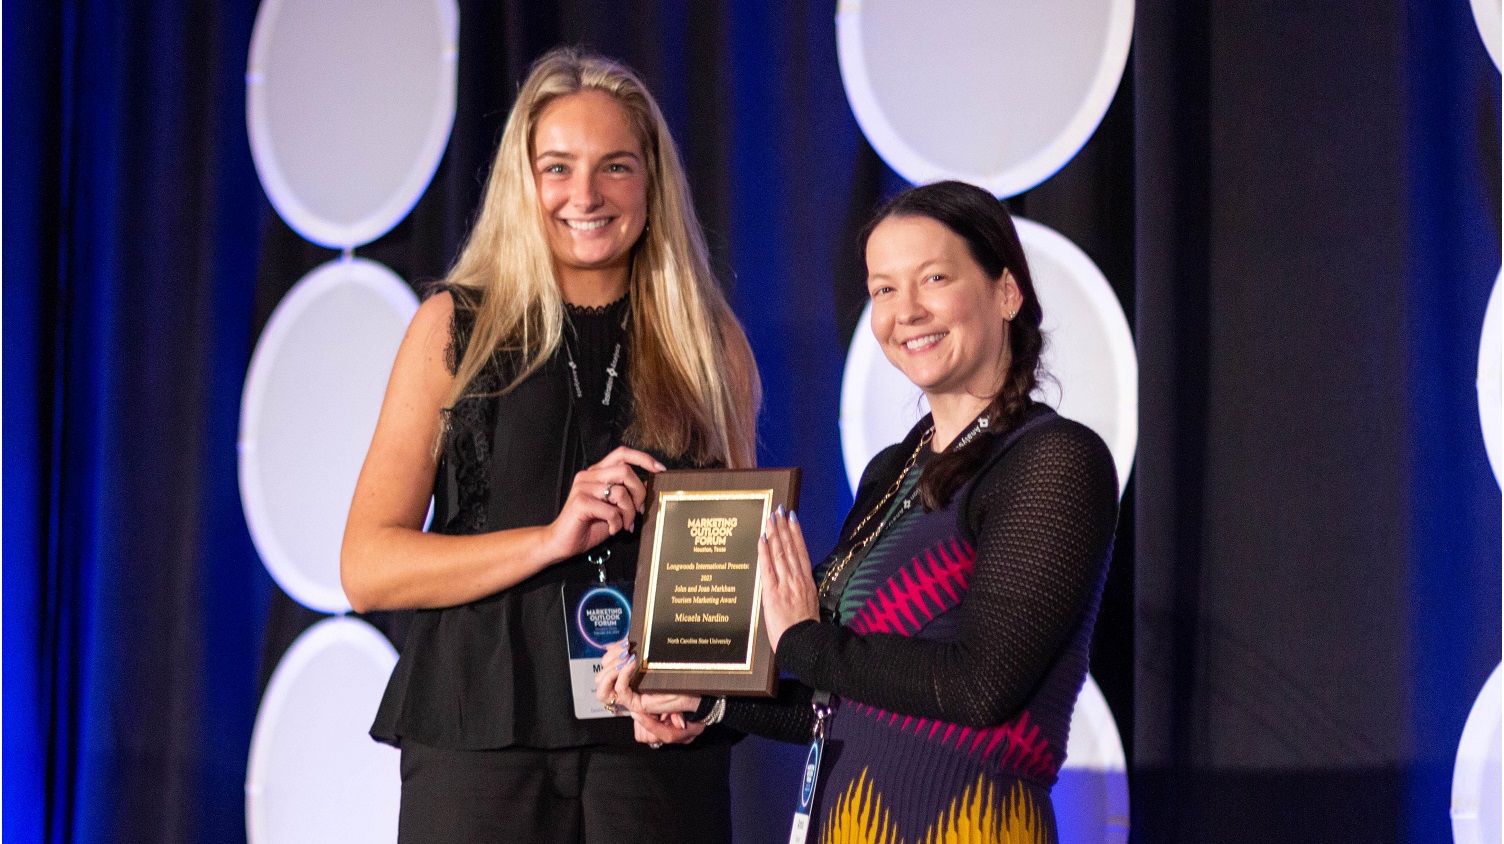 Micaela with her plaque - Micaela Nardino Receives Marketing Award from Travel and Tourism Research Association - Parks Recreation and Tourism Management NC State University